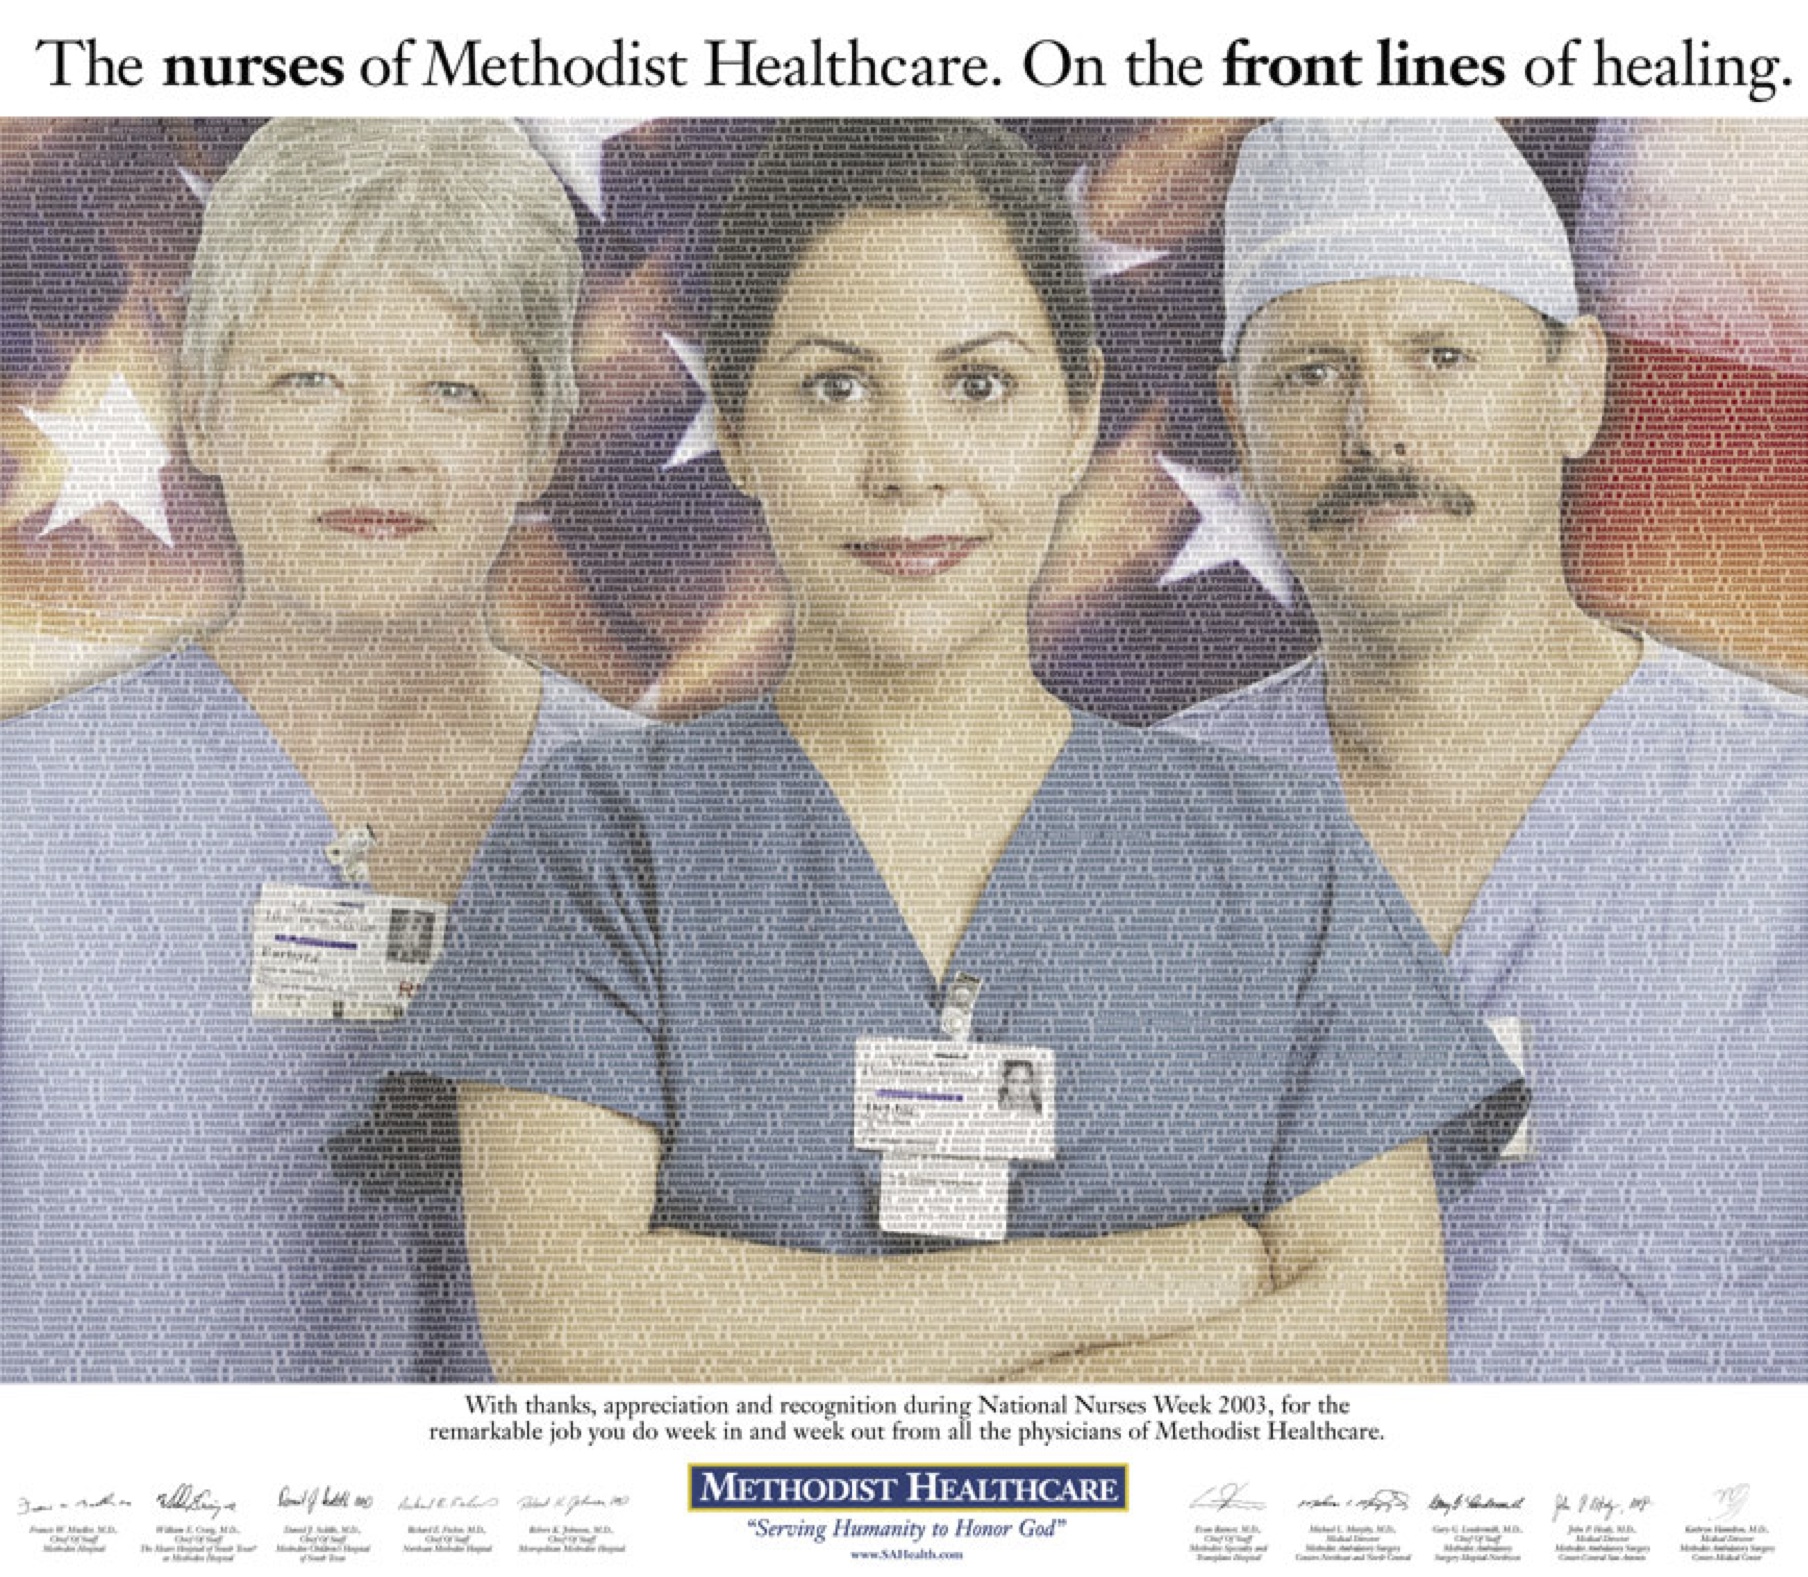 Client:The Wood Agency/Methodist HealthCare